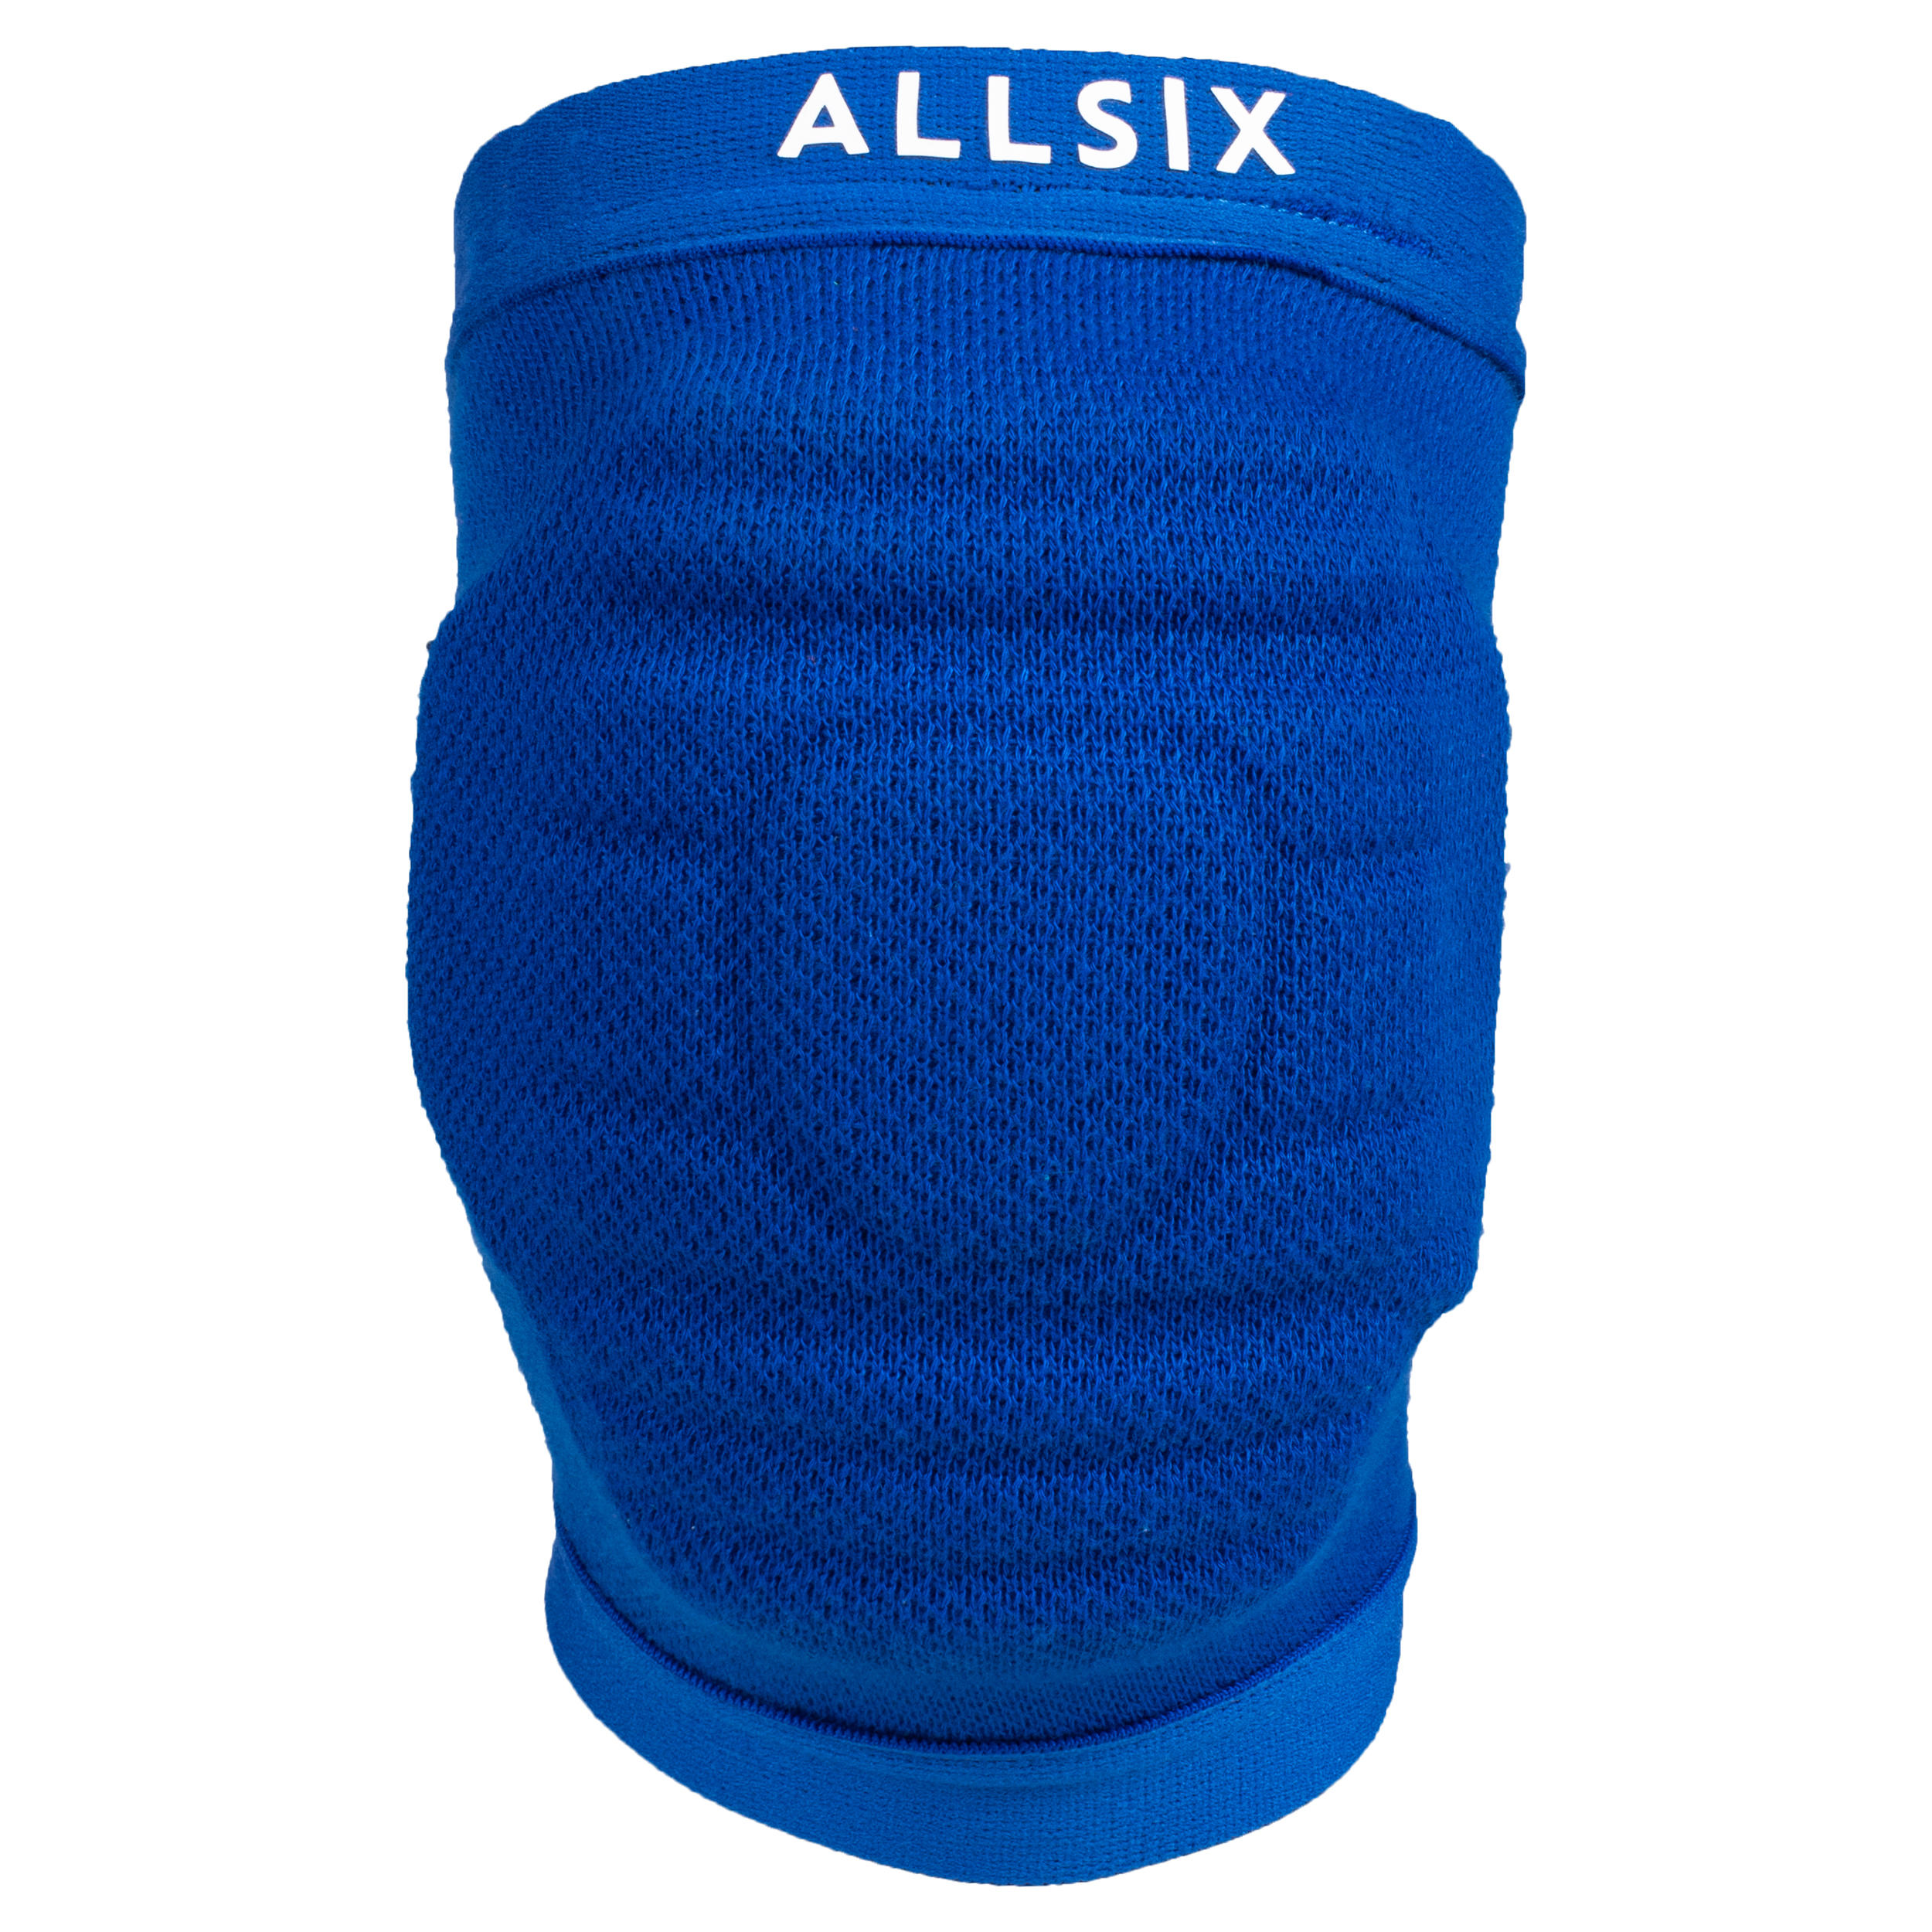 Volleyball Knee Pads VKP900 - Blue 2/5